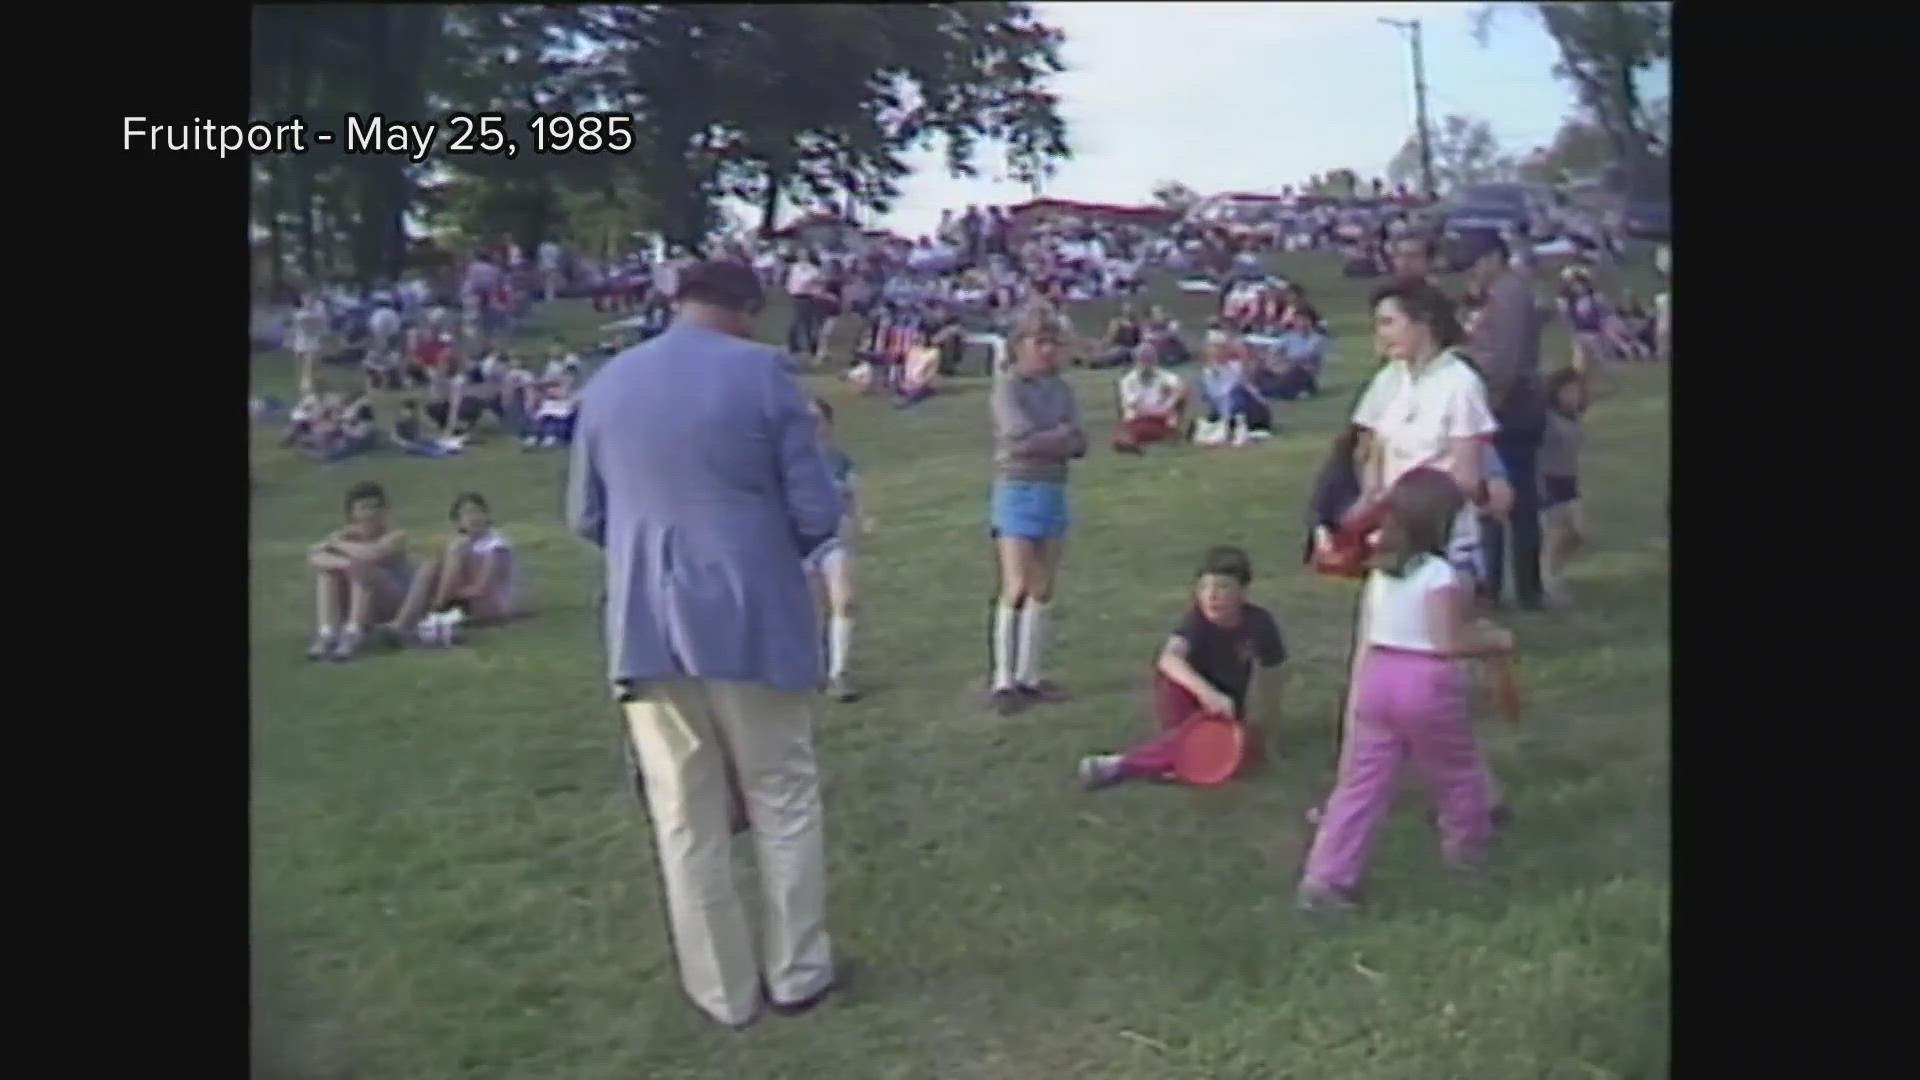 13 ON YOUR SIDE unearthed footage from 1985 to honor Doug Mills' work, who passed from cancer on Sept. 24.